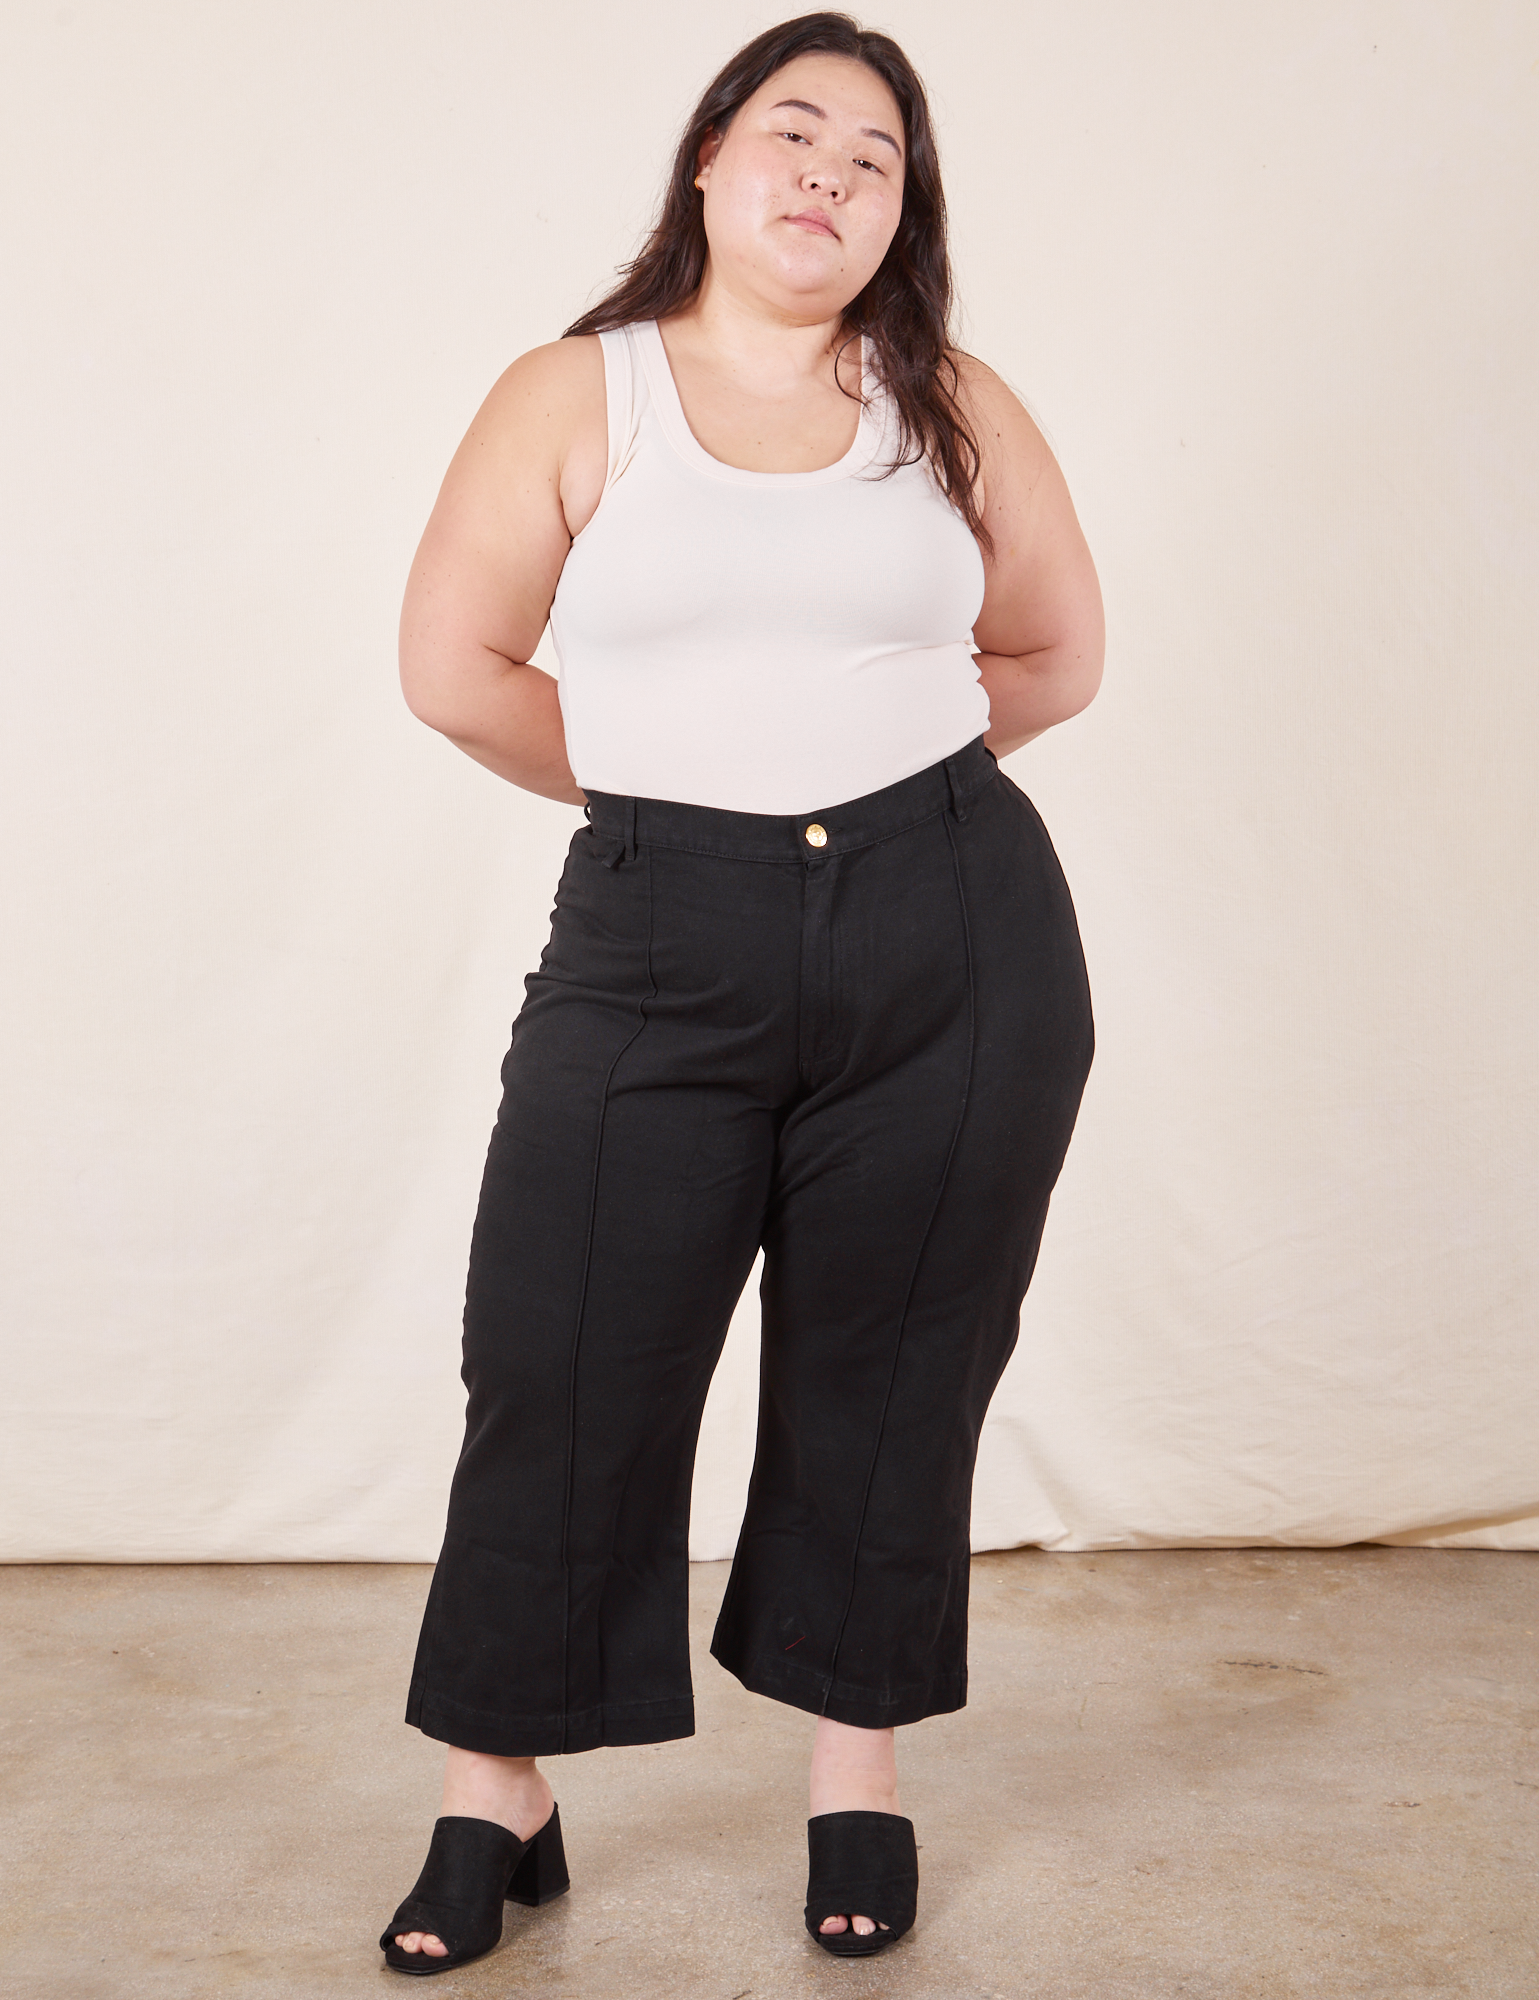 Ashley is 5&#39;7 and wearing 1XL Petite Western Pants in Basic Black paired with vintage off-white Tank Top